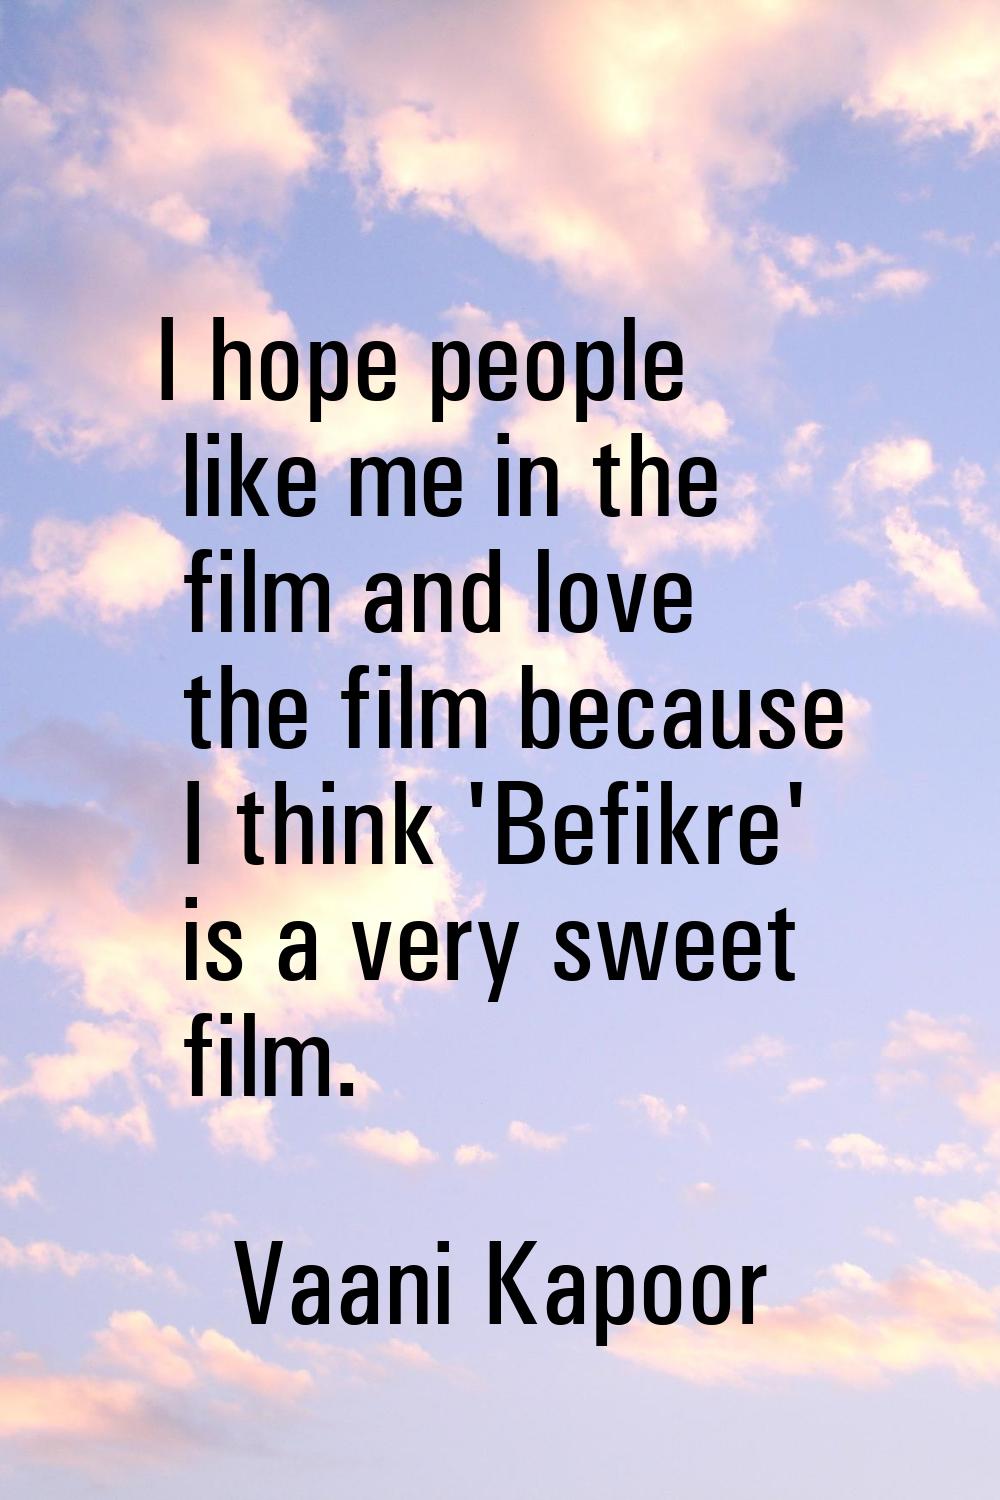 I hope people like me in the film and love the film because I think 'Befikre' is a very sweet film.